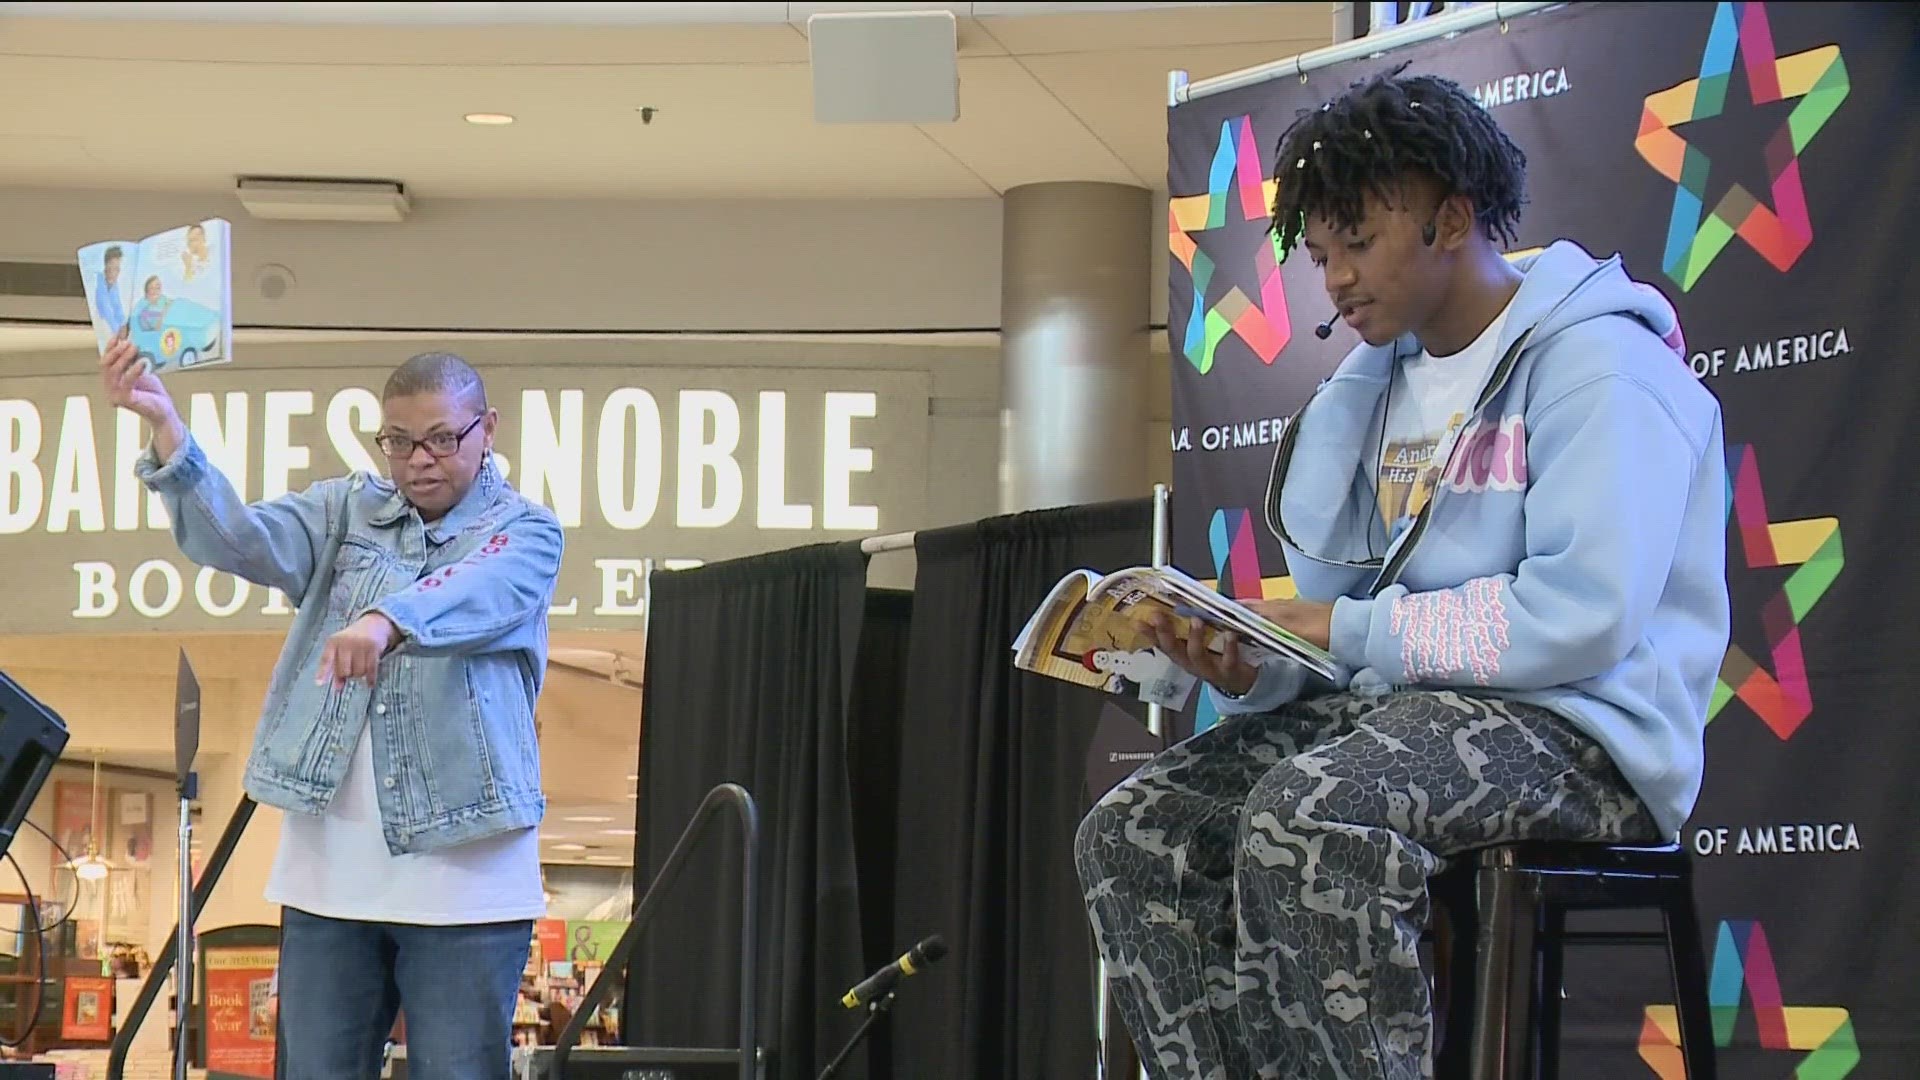 The event featured teen author Andrew Brundidge, who wrote a children's books about his experiences growing up with three siblings on the autism spectrum.